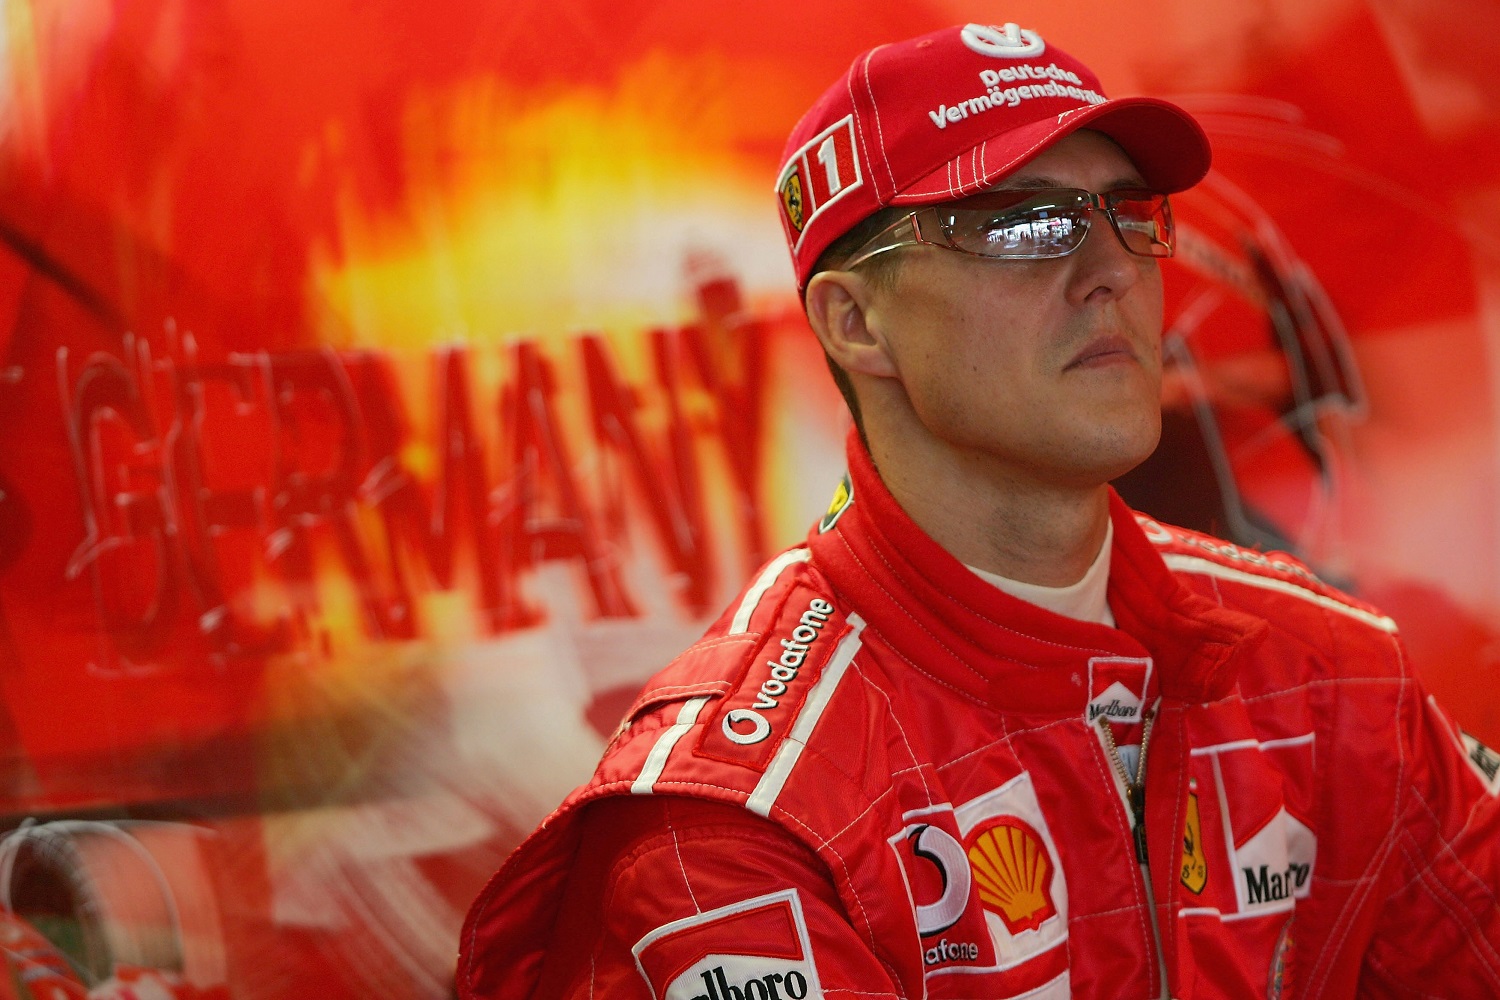 Michael Schumacher of Germany and Ferrari waits in the garage during the practice session for the German F1 Grand Prix at the Hockenheim Circuit on July 23, 2004, in Hockenheim, Germany.